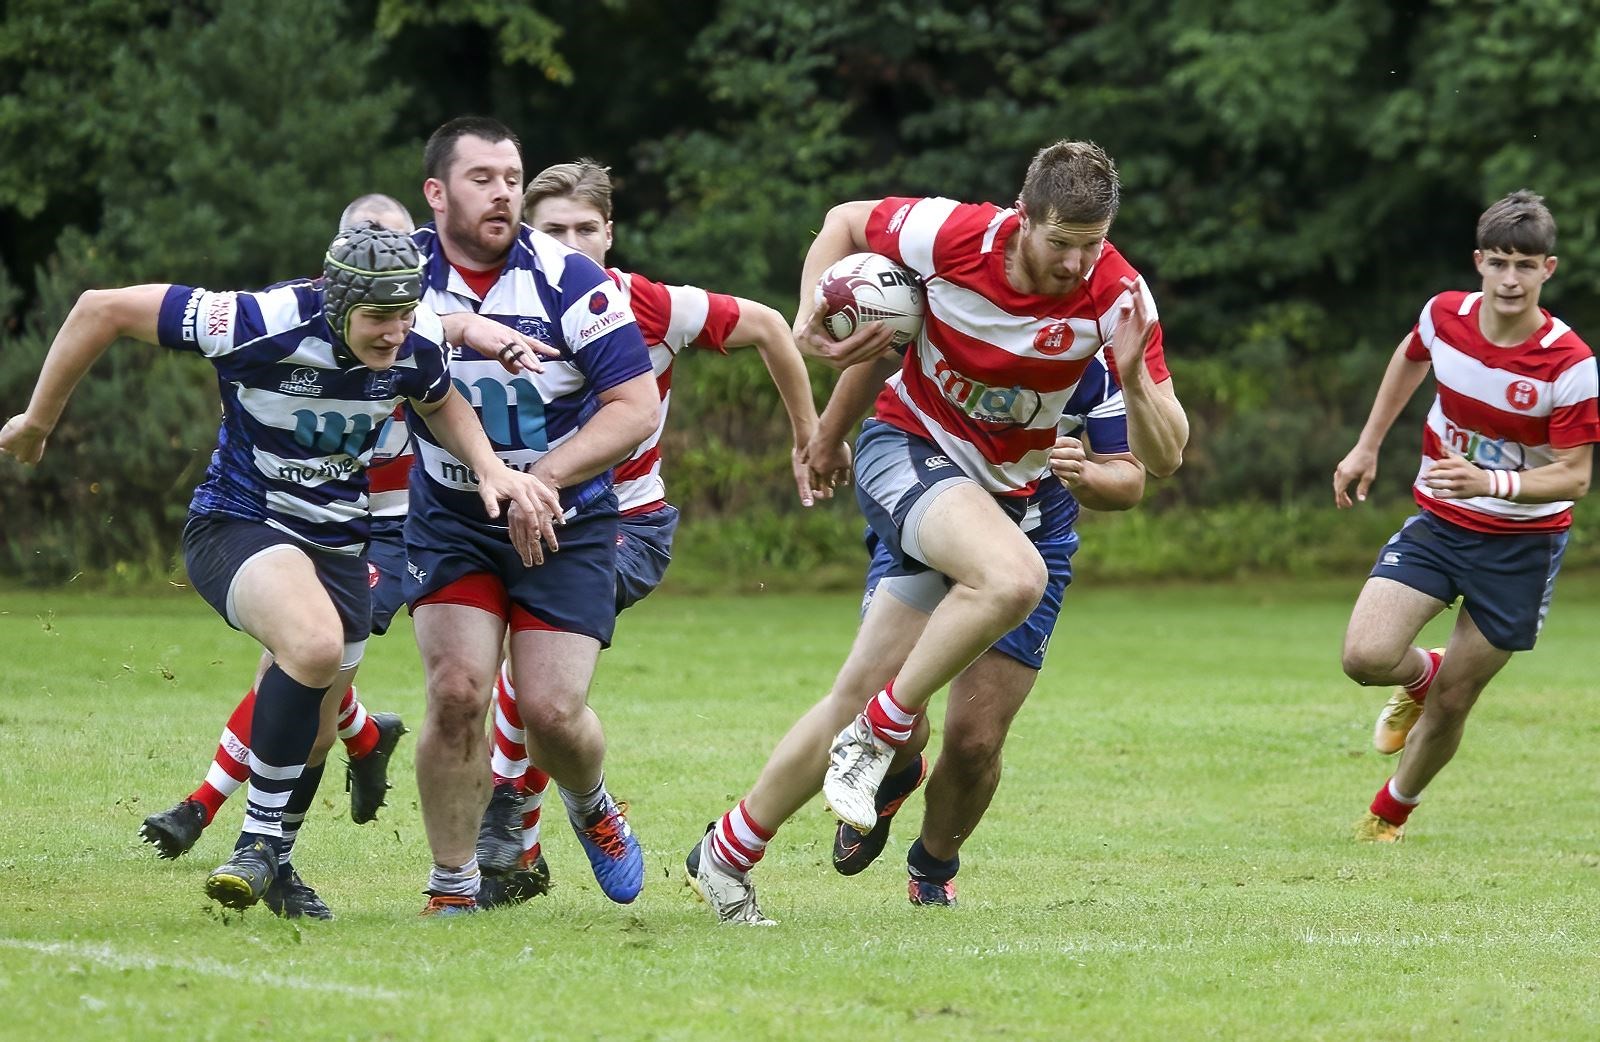 Stewart Bright breaks forward for Moray supported by Cameron Morrison Smith (left) and Rory Millar. Photo: John MacGregor